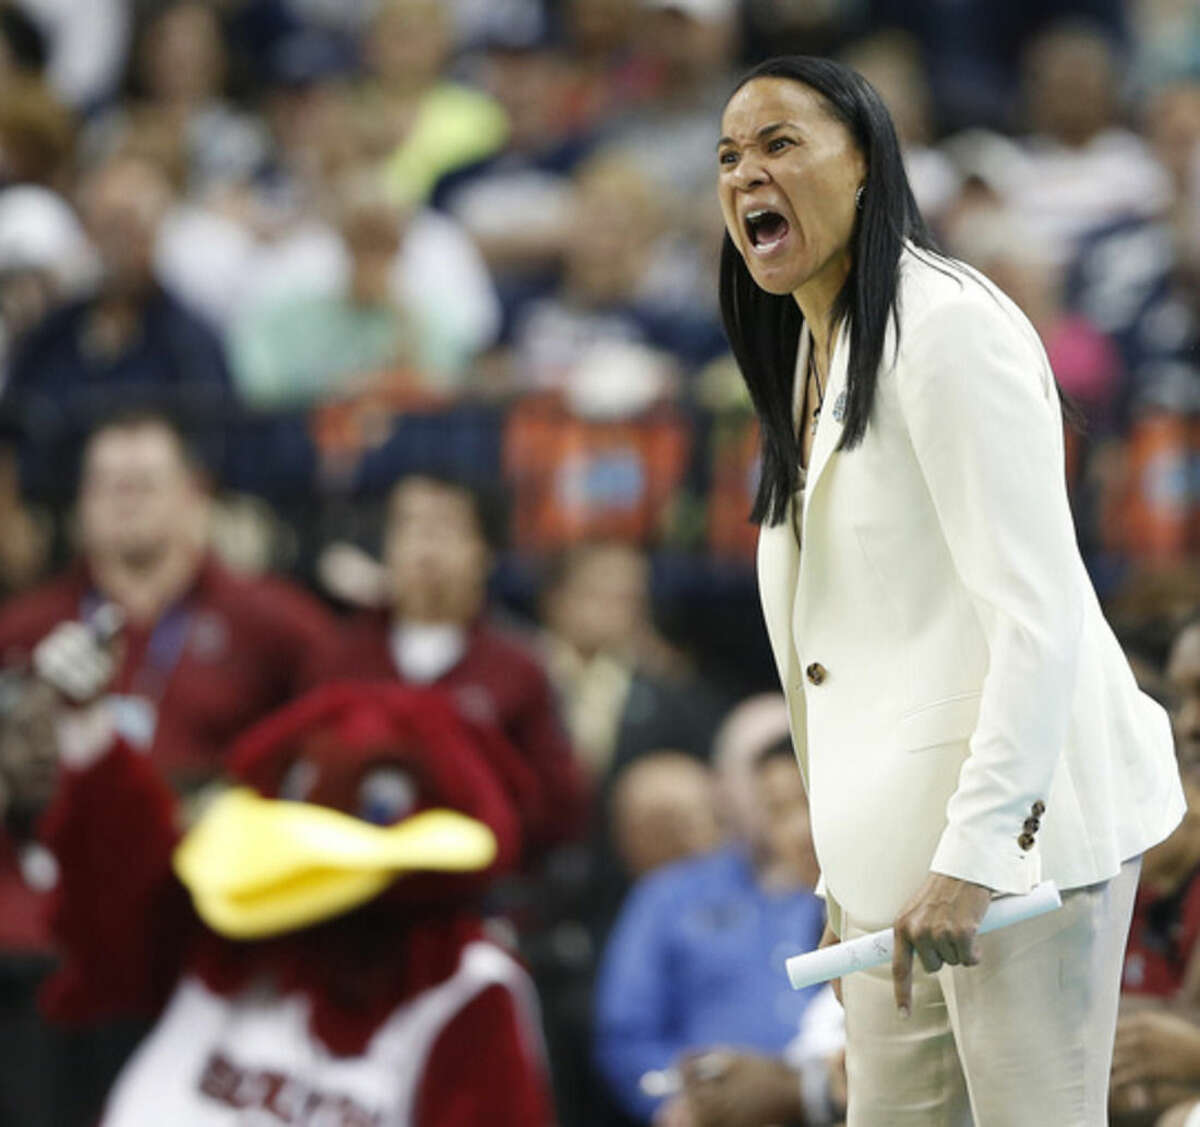 South Carolina head coach Dawn Staley speaks to players during the second half of the NCAA Women's Final Four tournament college basketball semifinal game against Notre Dame, Sunday, April 5, 2015, in Tampa, Fla. (AP Photo/Brynn Anderson)